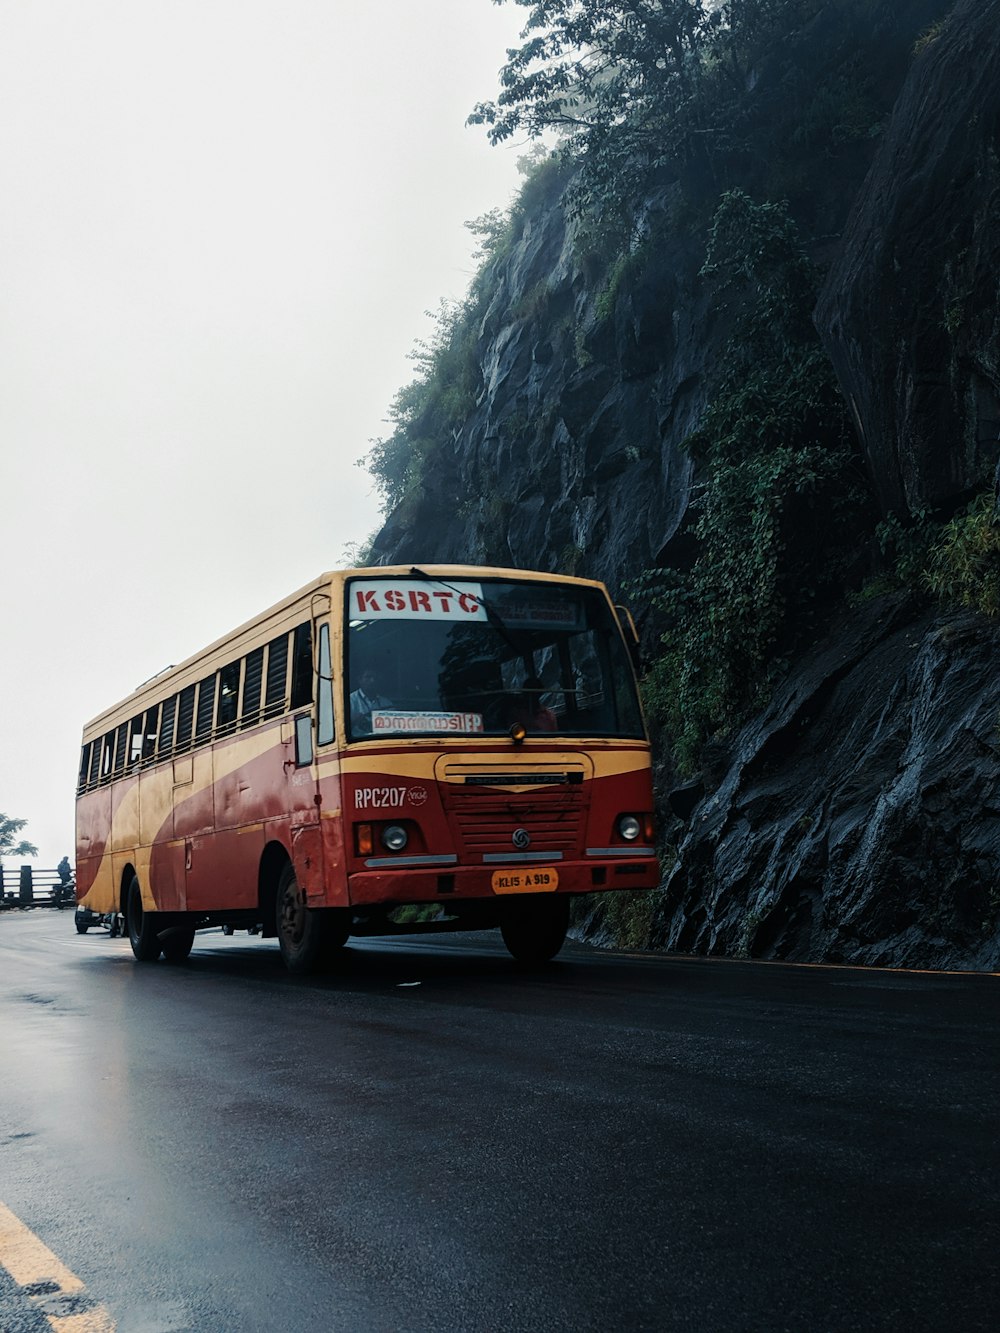 brown and beige bus on paved road